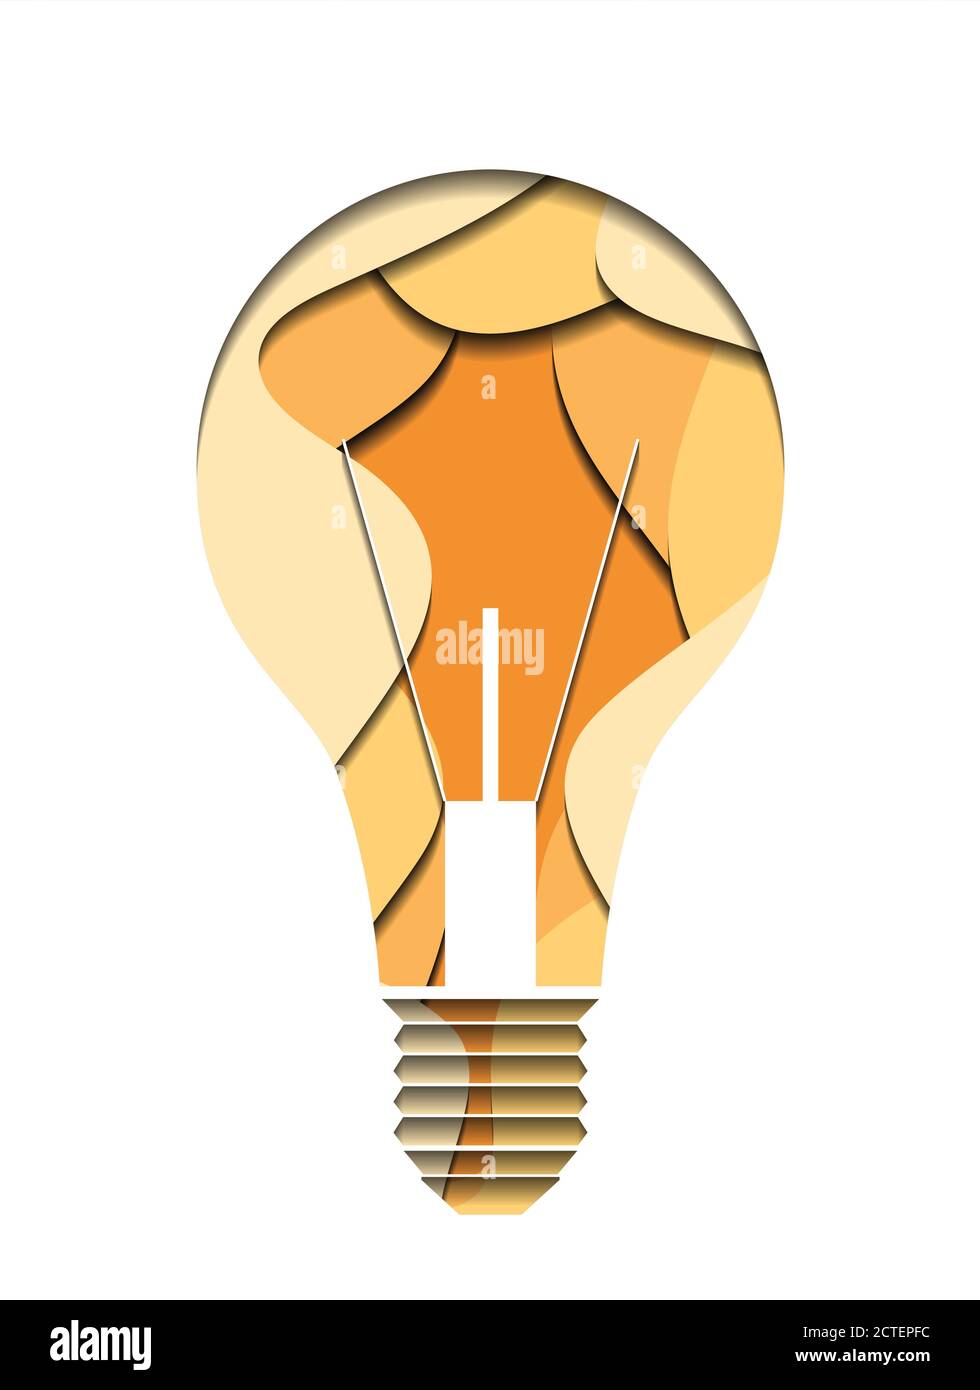 3d Illustration of a light bulb cut from paper. Multi level illustration. Vector element for your creativity Stock Vector